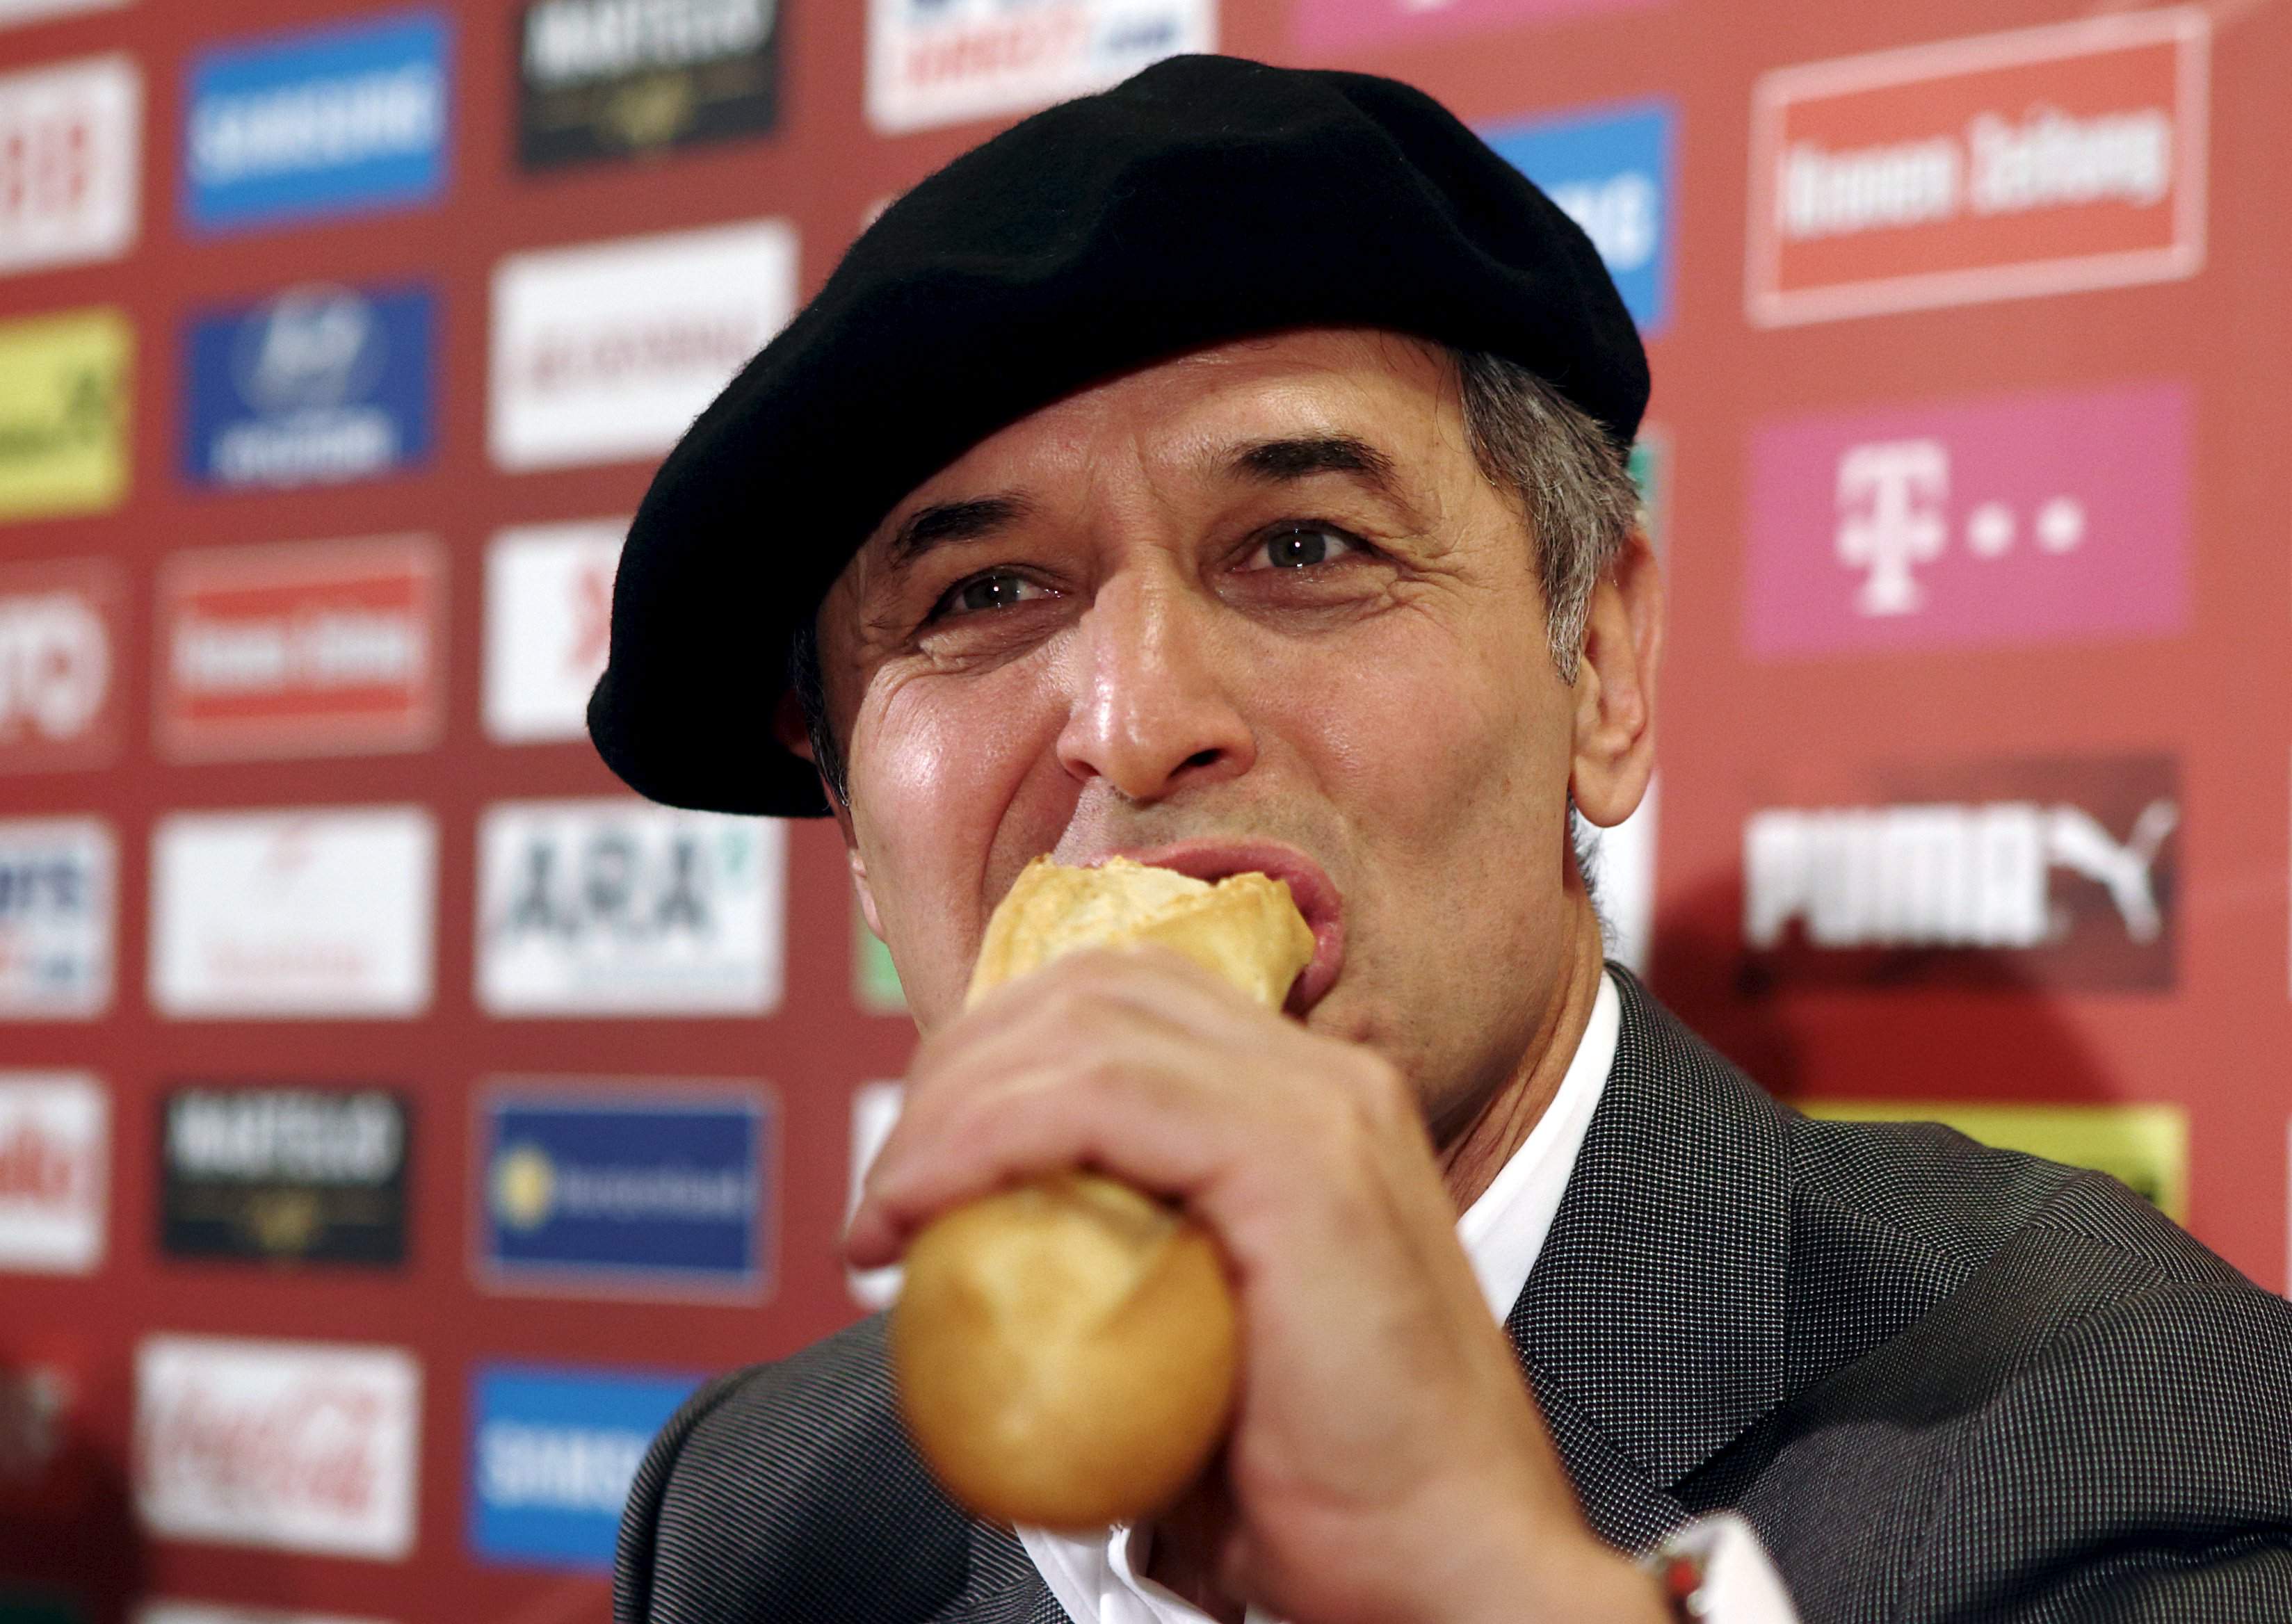 Austrian national soccer team coach Marcel Koller eats French bread during a news conference after the team qualified for the UEFA Euro 2016 in Vienna, Austria, September 9, 2015. REUTERS/Heinz-Peter Bader